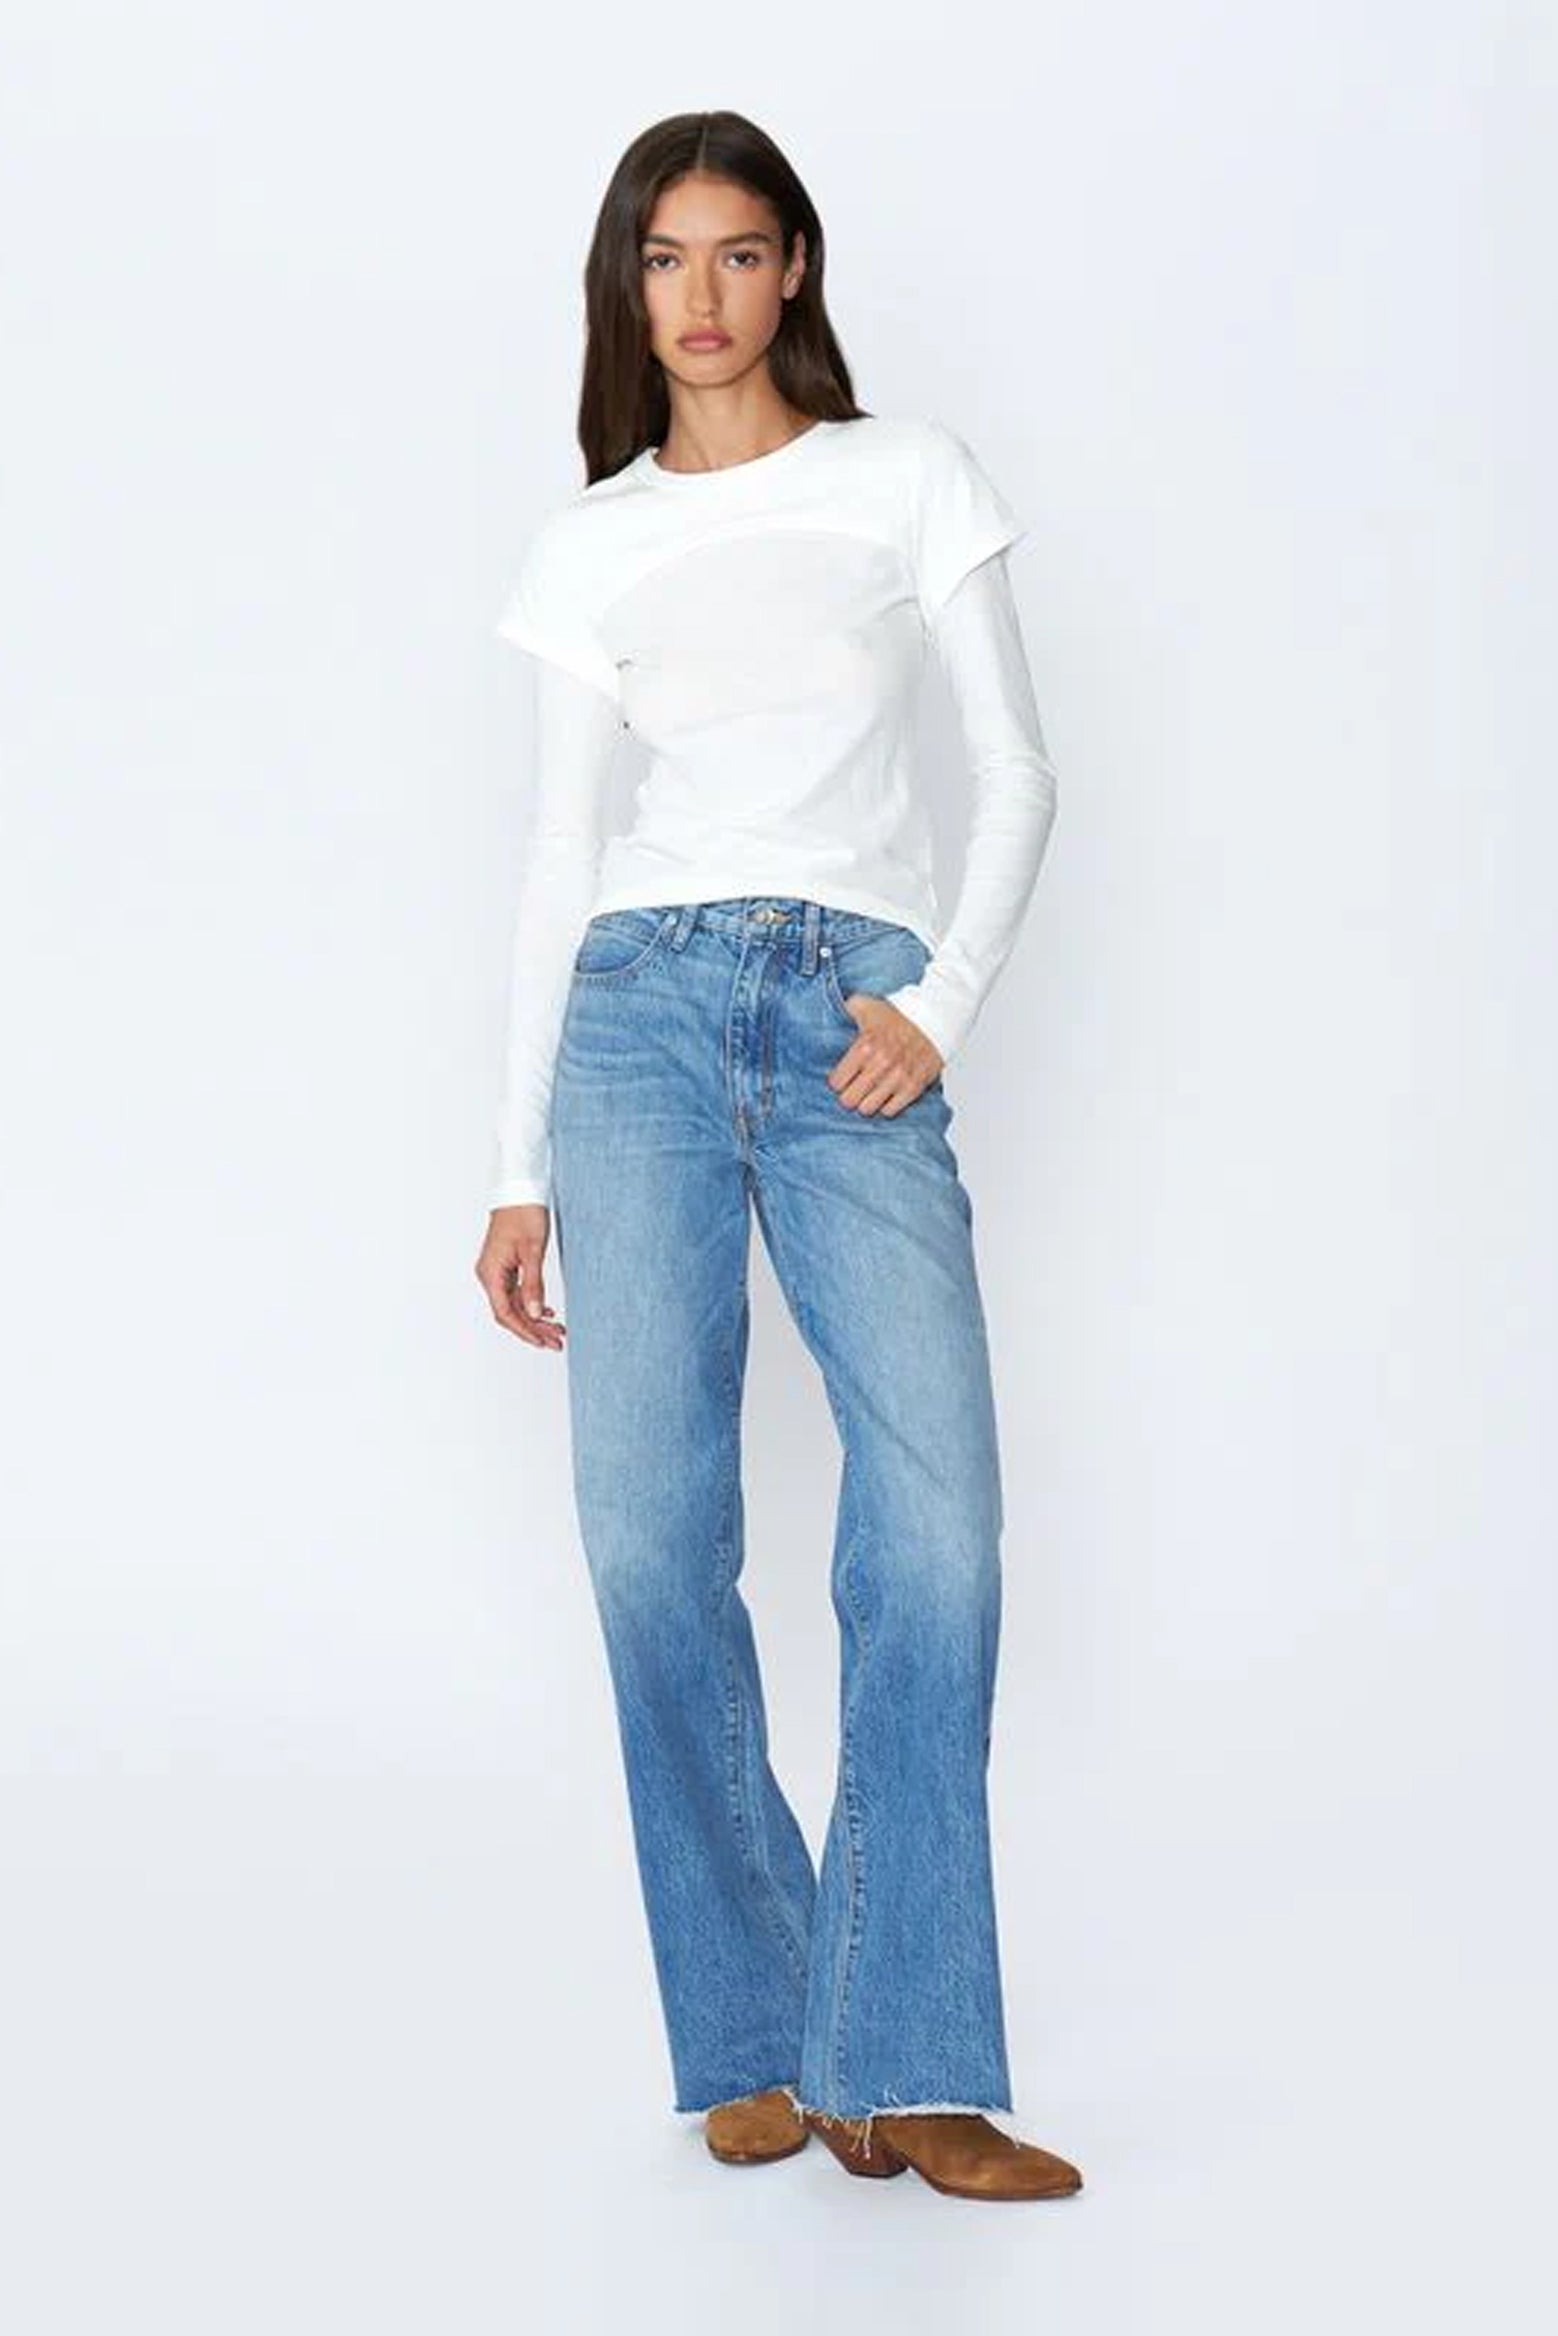 The SLVRLAKE Grace High Rise Wide Leg Jeans in Great Romance available at The New Trend.